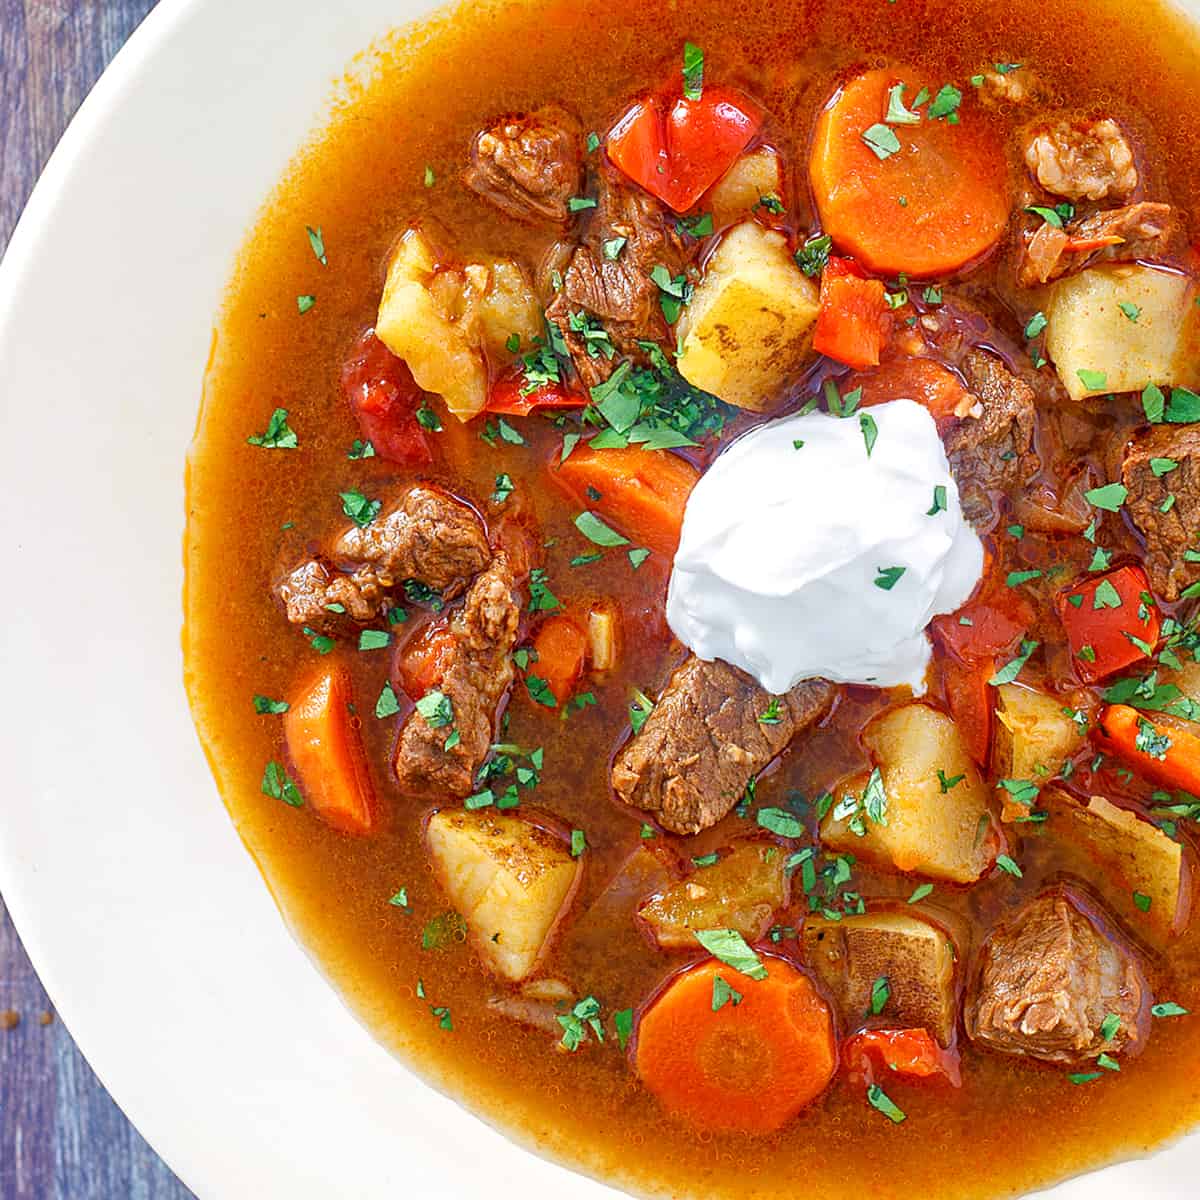 hungarian goulash recipe traditional authentic gulyas beef stew paprika carrots peppers potatoes sour cream caraway